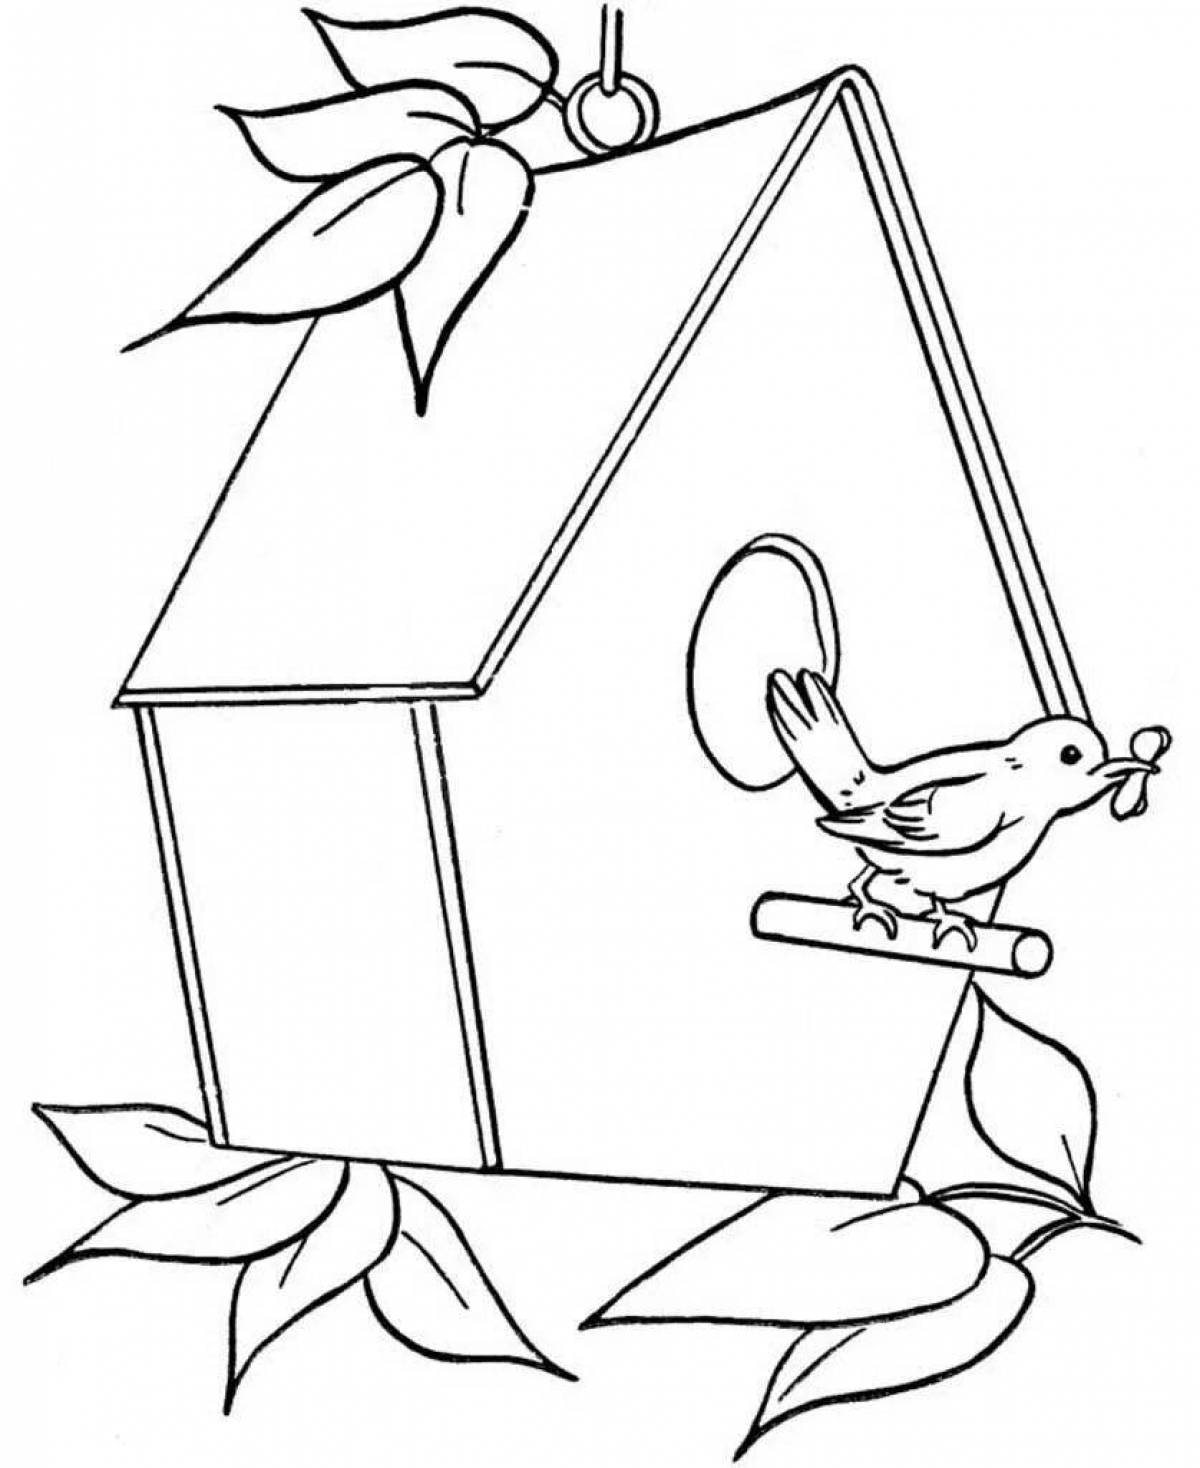 Sweet starling coloring pages for kids